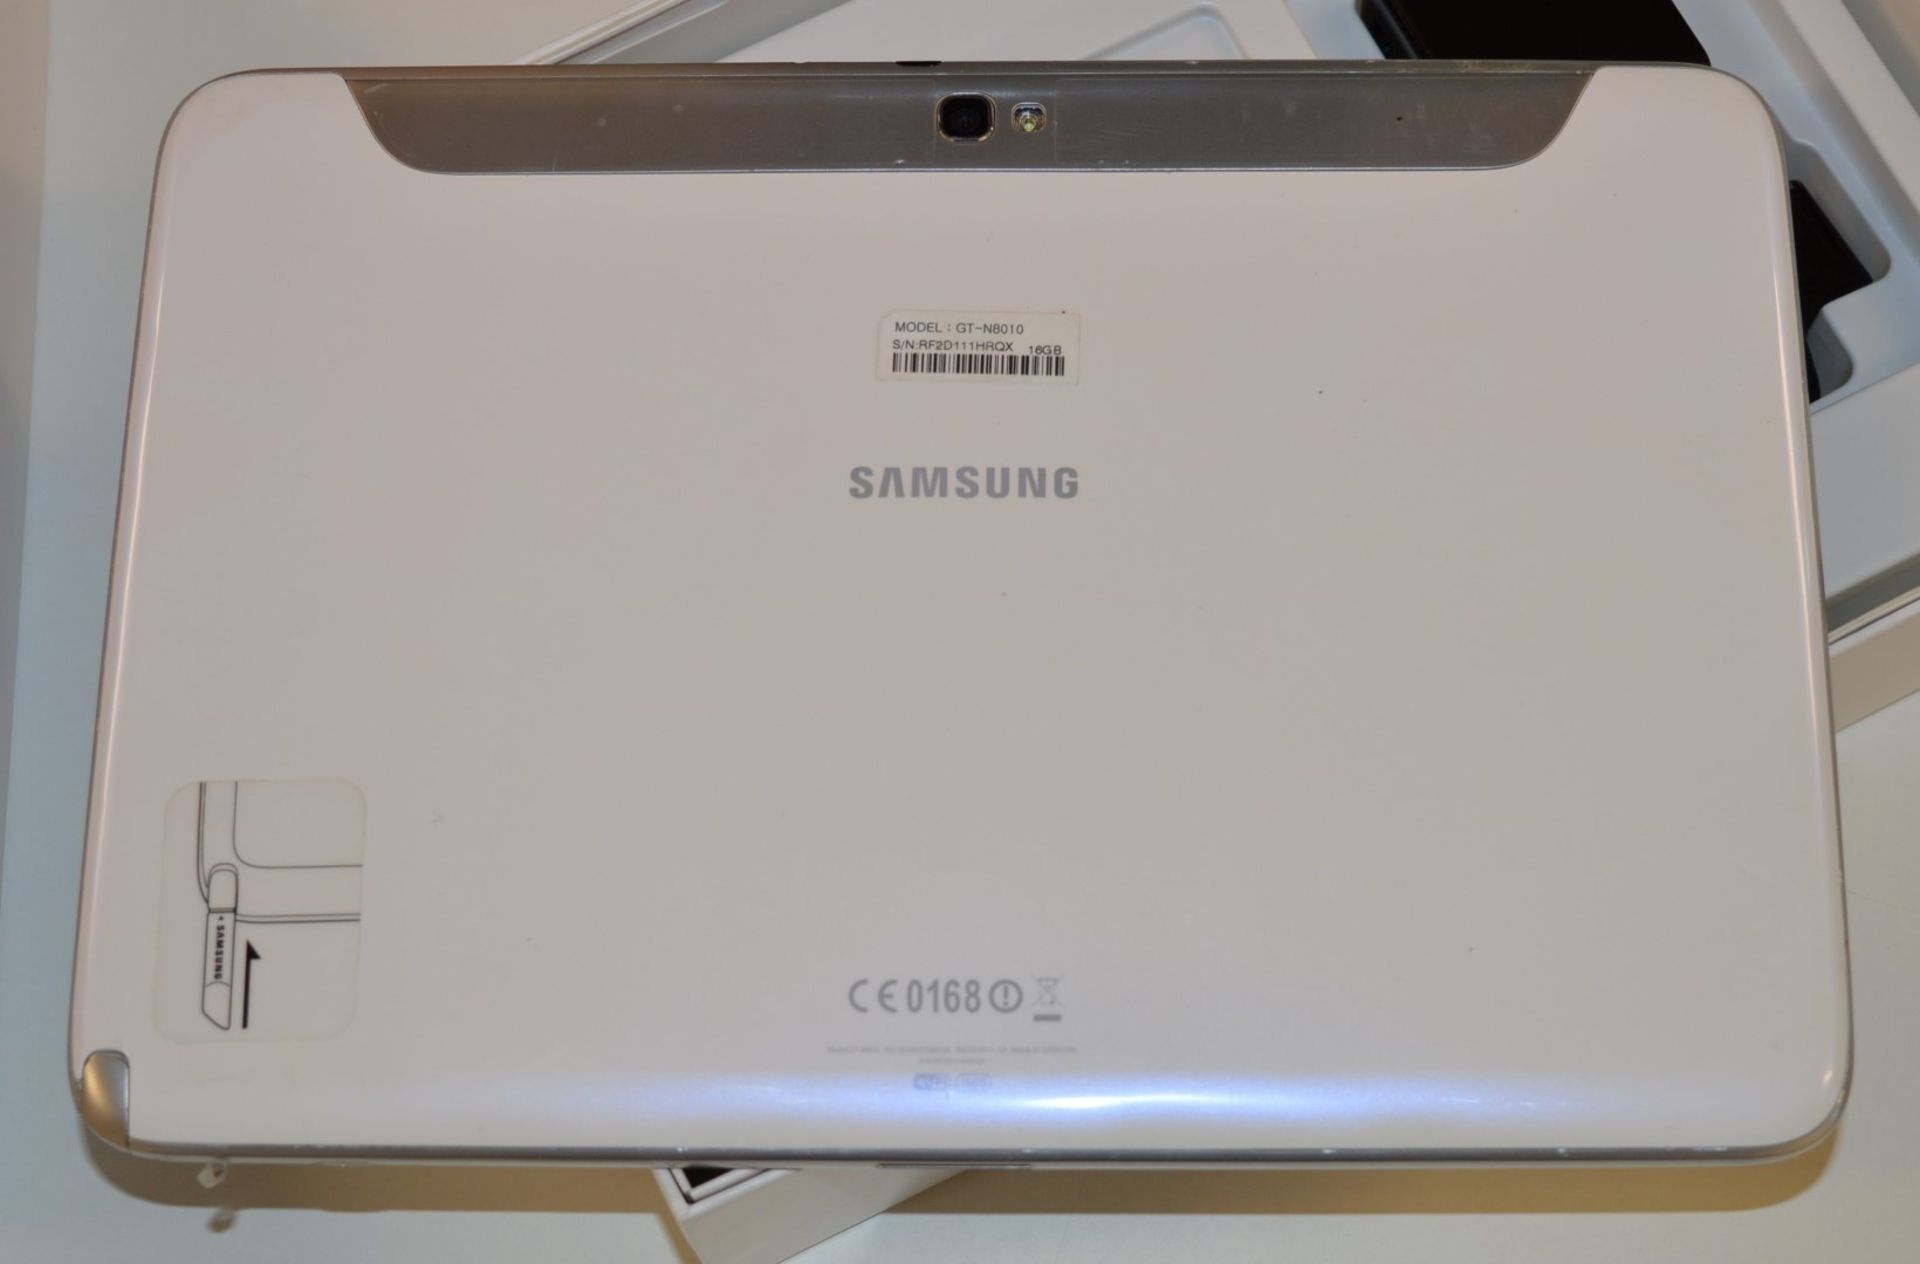 1 x Samsung Galaxy Note 10.1 Tablet Computer - Features Quad Core 1.4ghz Processor, 2gb Ram, 16gb - Image 4 of 10